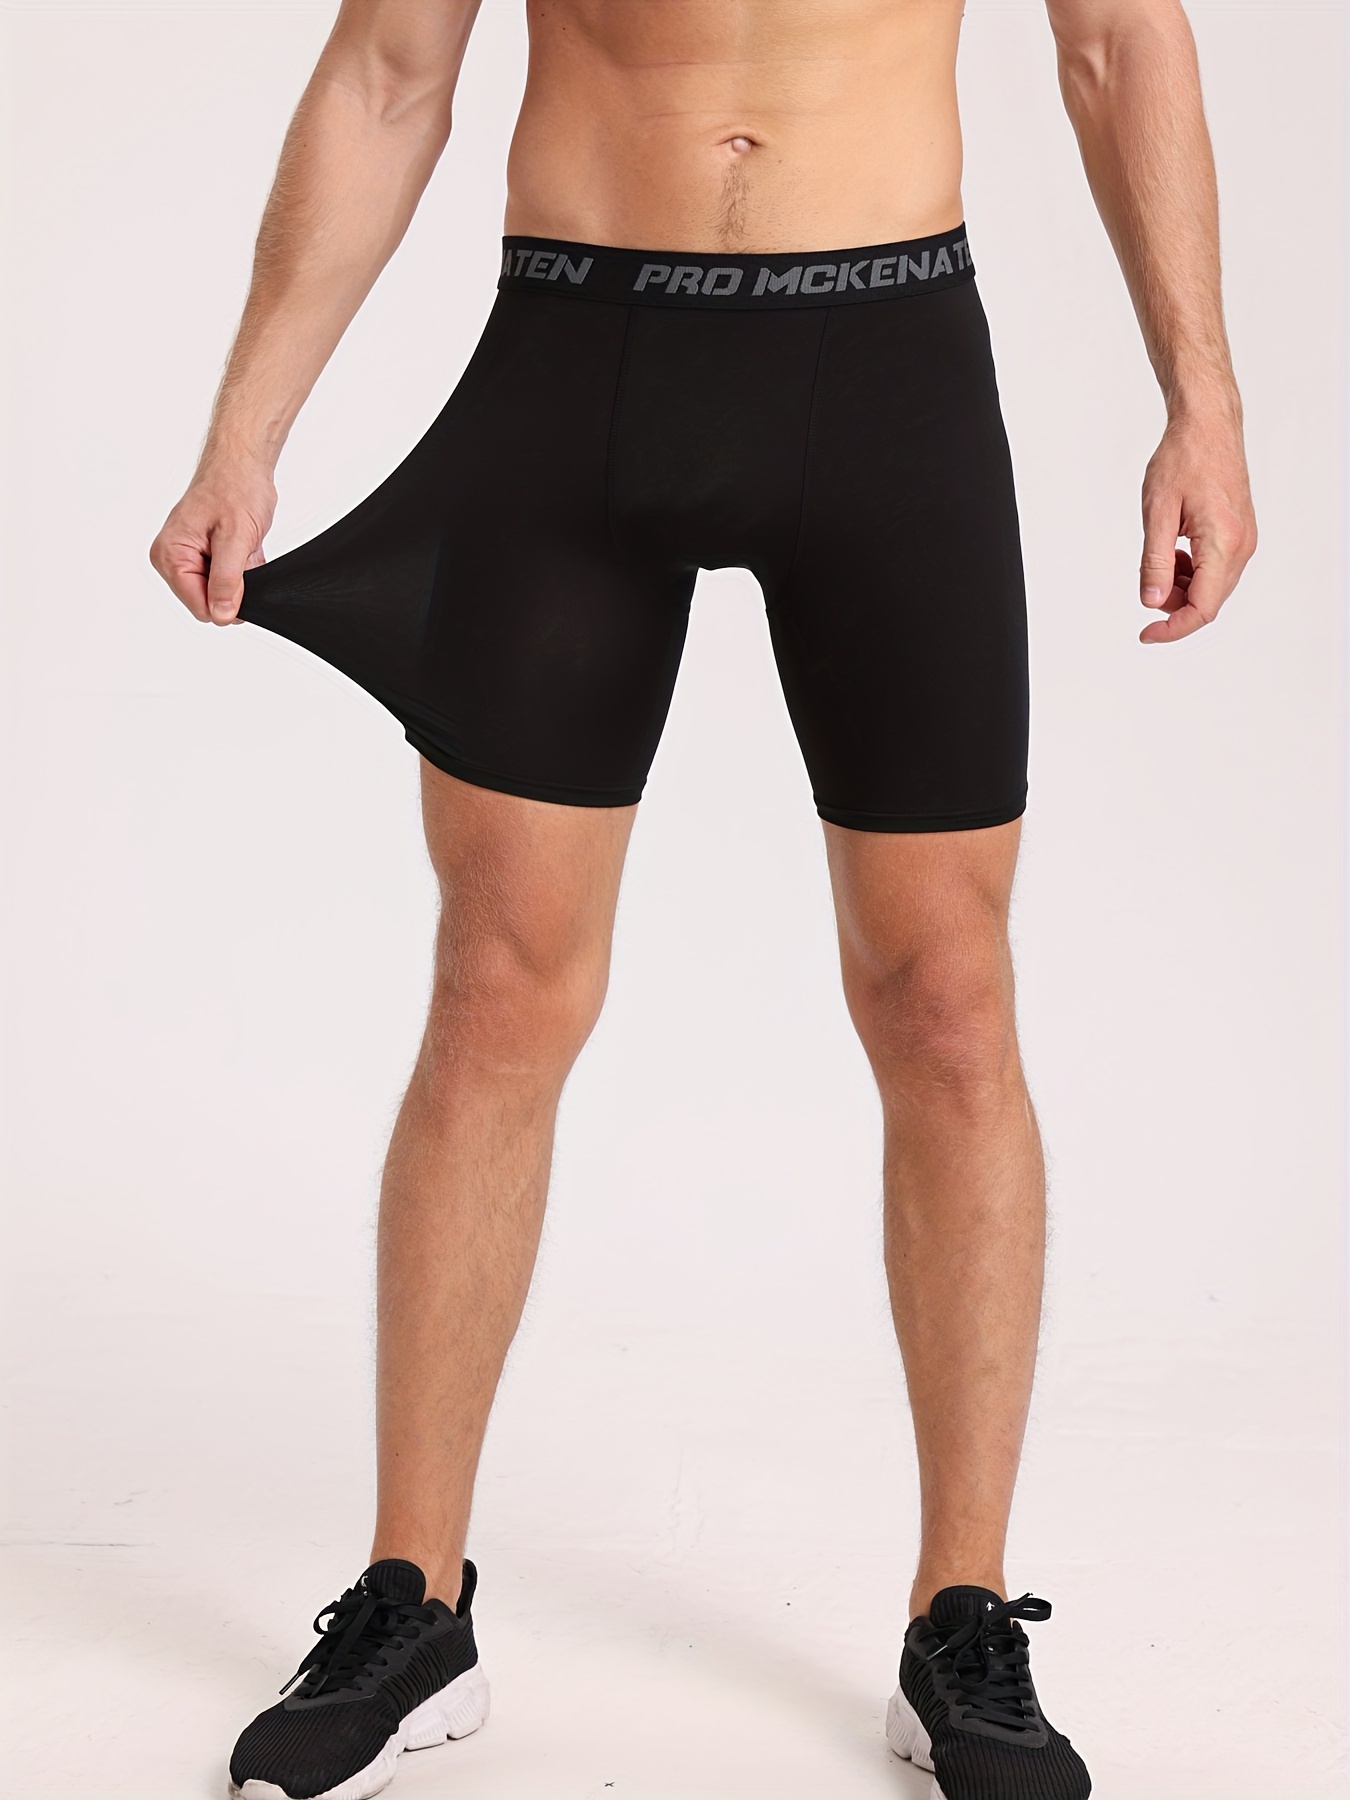 Mens Compression Underwear: 3D Print Tight Boxers With High Elasticity,  Quick Dry Wicking, And Sport Fitness Shorts Gym Compression Shorts 4005  From Qinchaoqin, $12.51